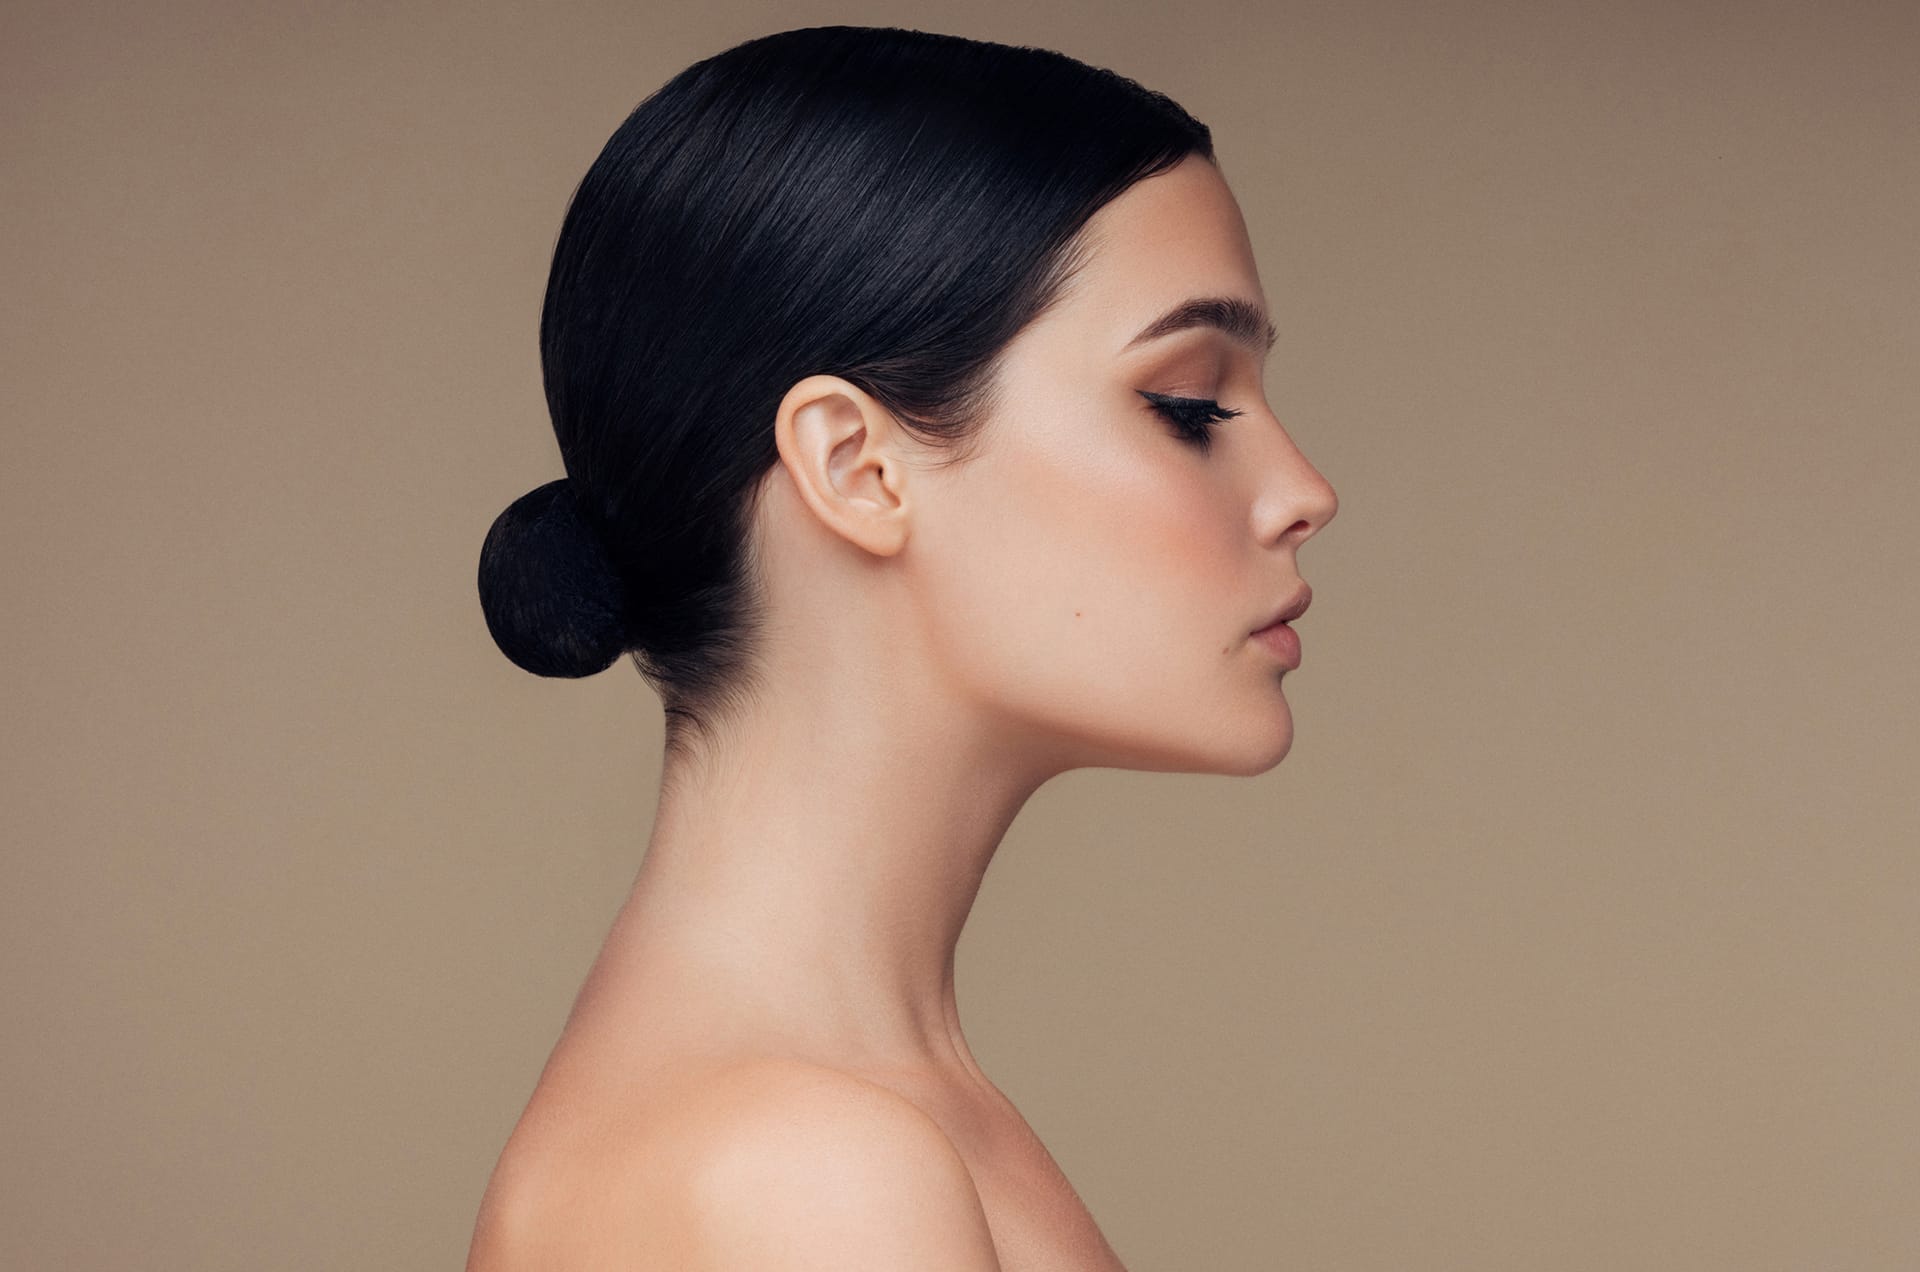 Woman with her hair in a bun looking to the side